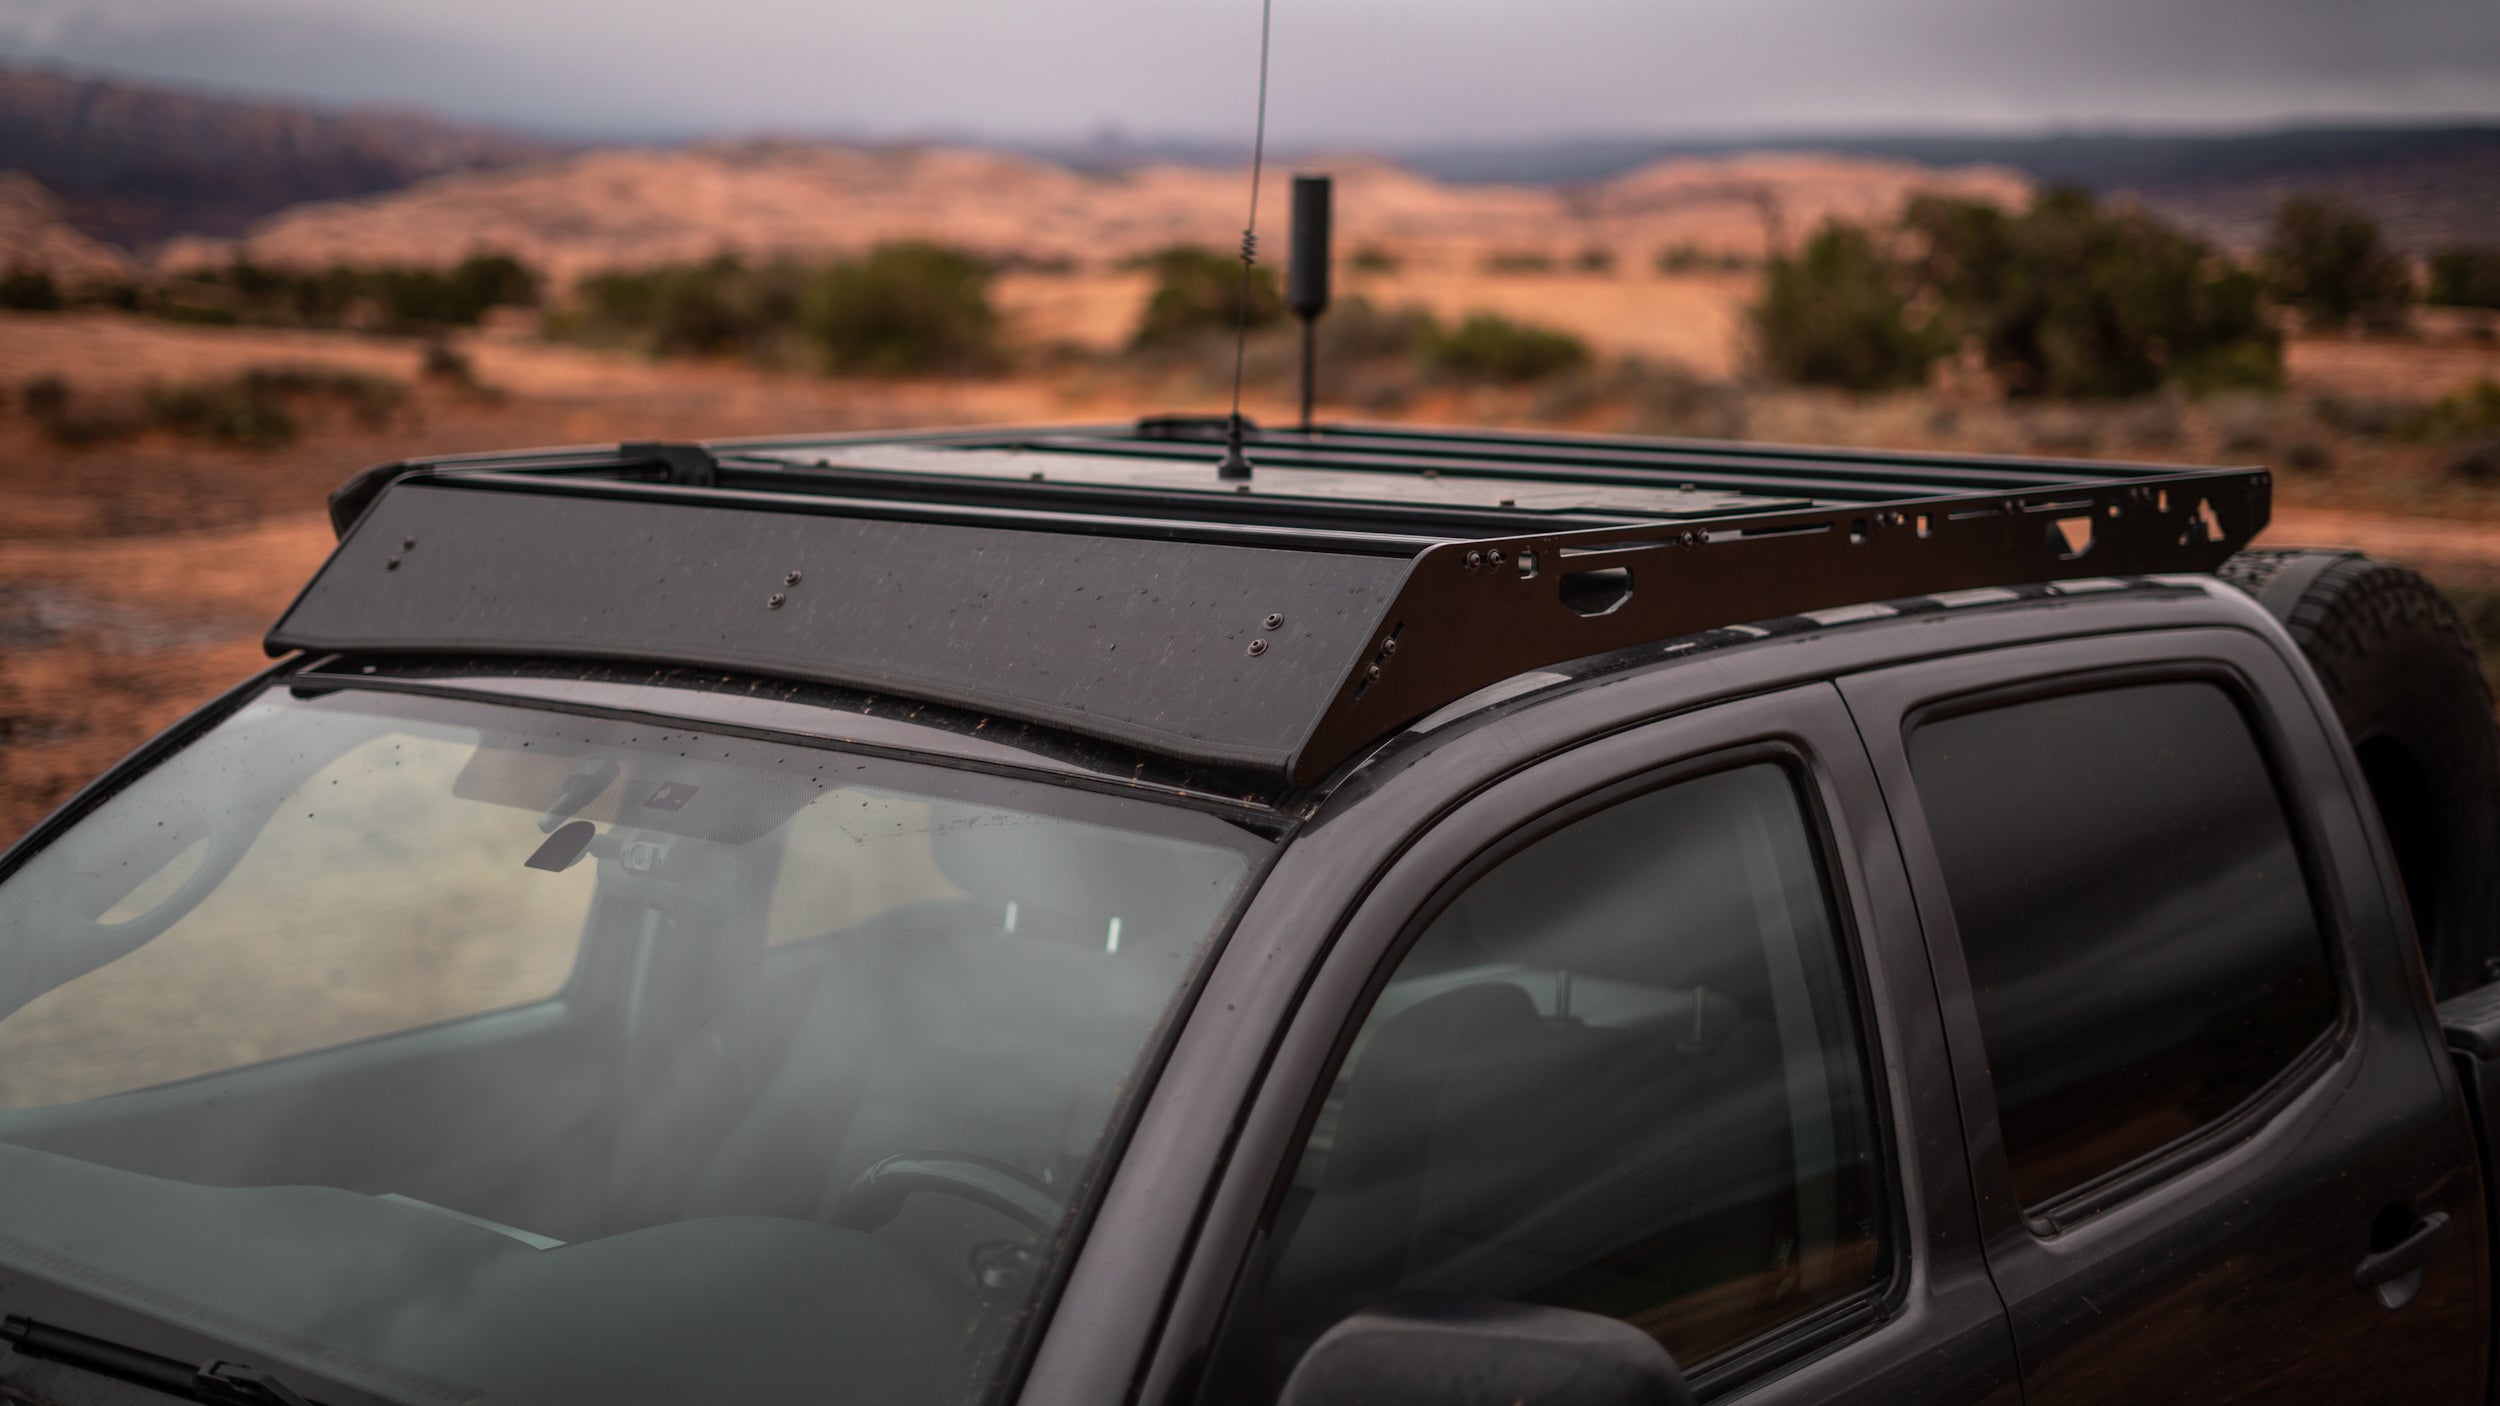 2nd/3rd Gen Toyota Tacoma Roof Rack Front corner close up of rack on vehicle outside